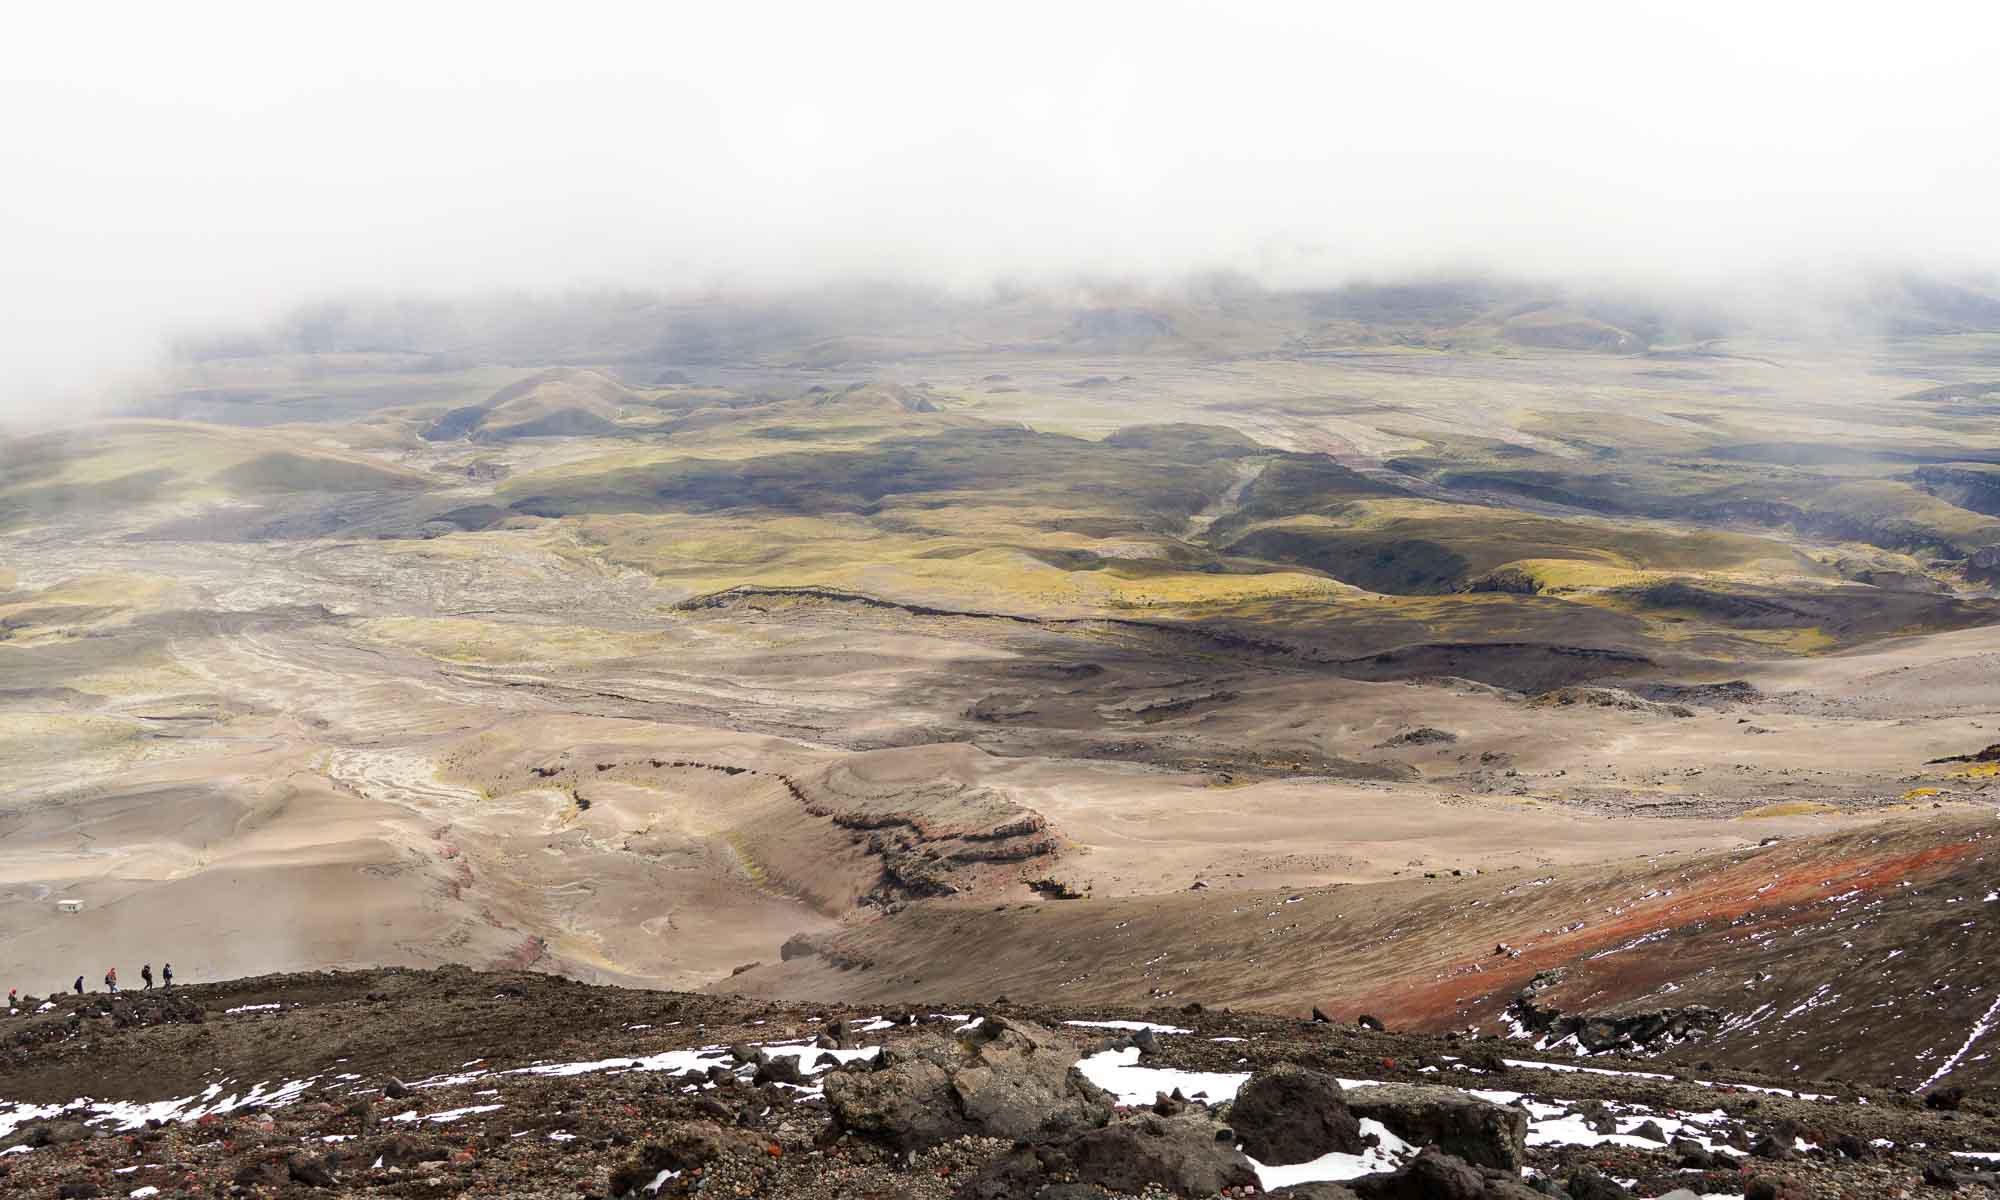 View from Cotopaxi